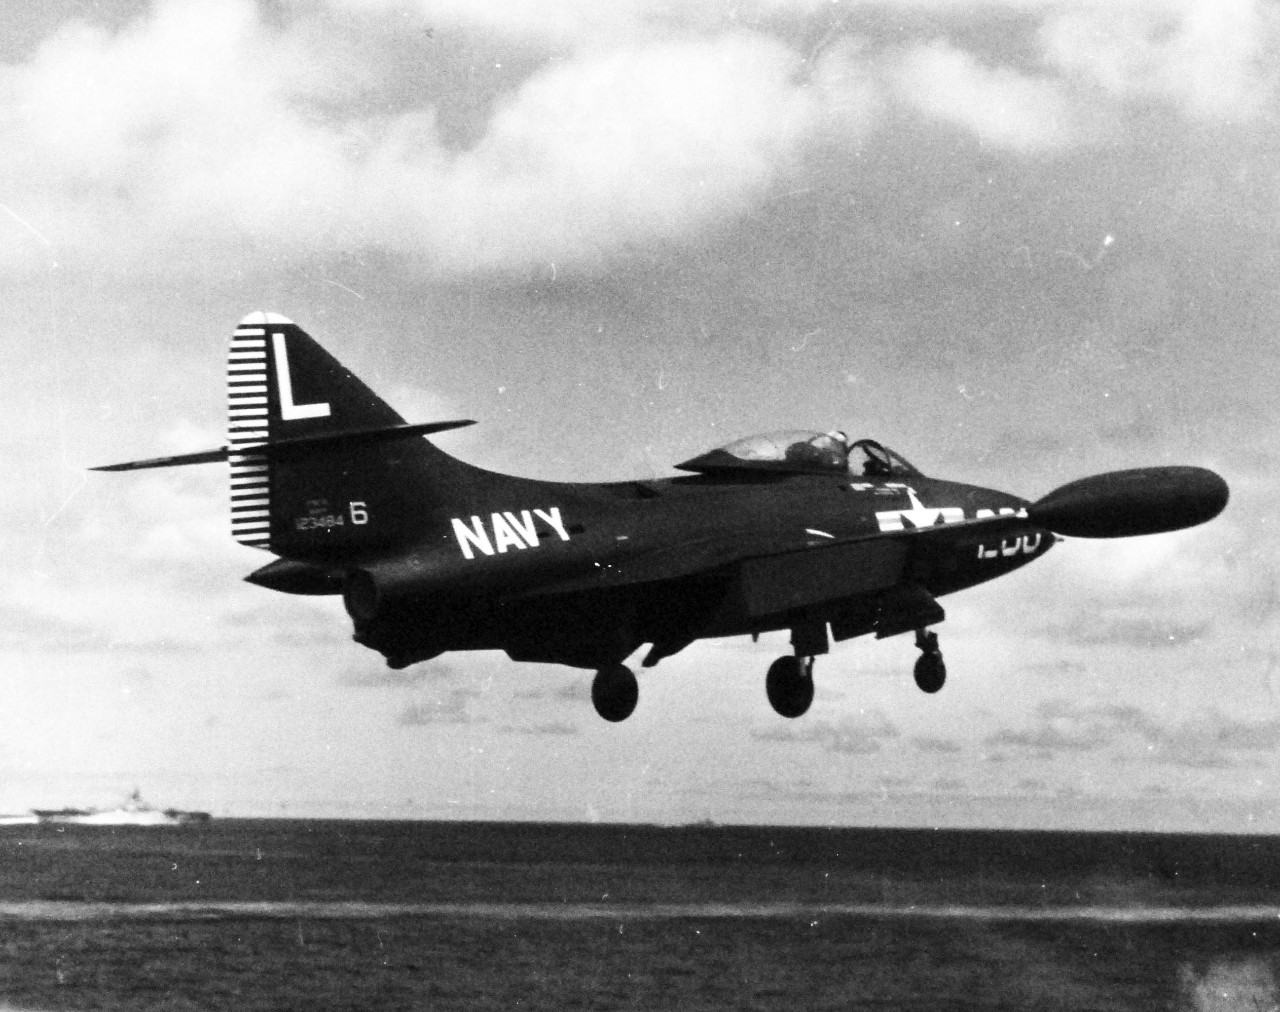 https://www.history.navy.mil/content/history/museums/nmusn/explore/photography/aircraft-us/aircraft-usn-f/f9f-panther/80-g-445221/_jcr_content/mediaitem/image.img.jpg/1608655806098.jpg